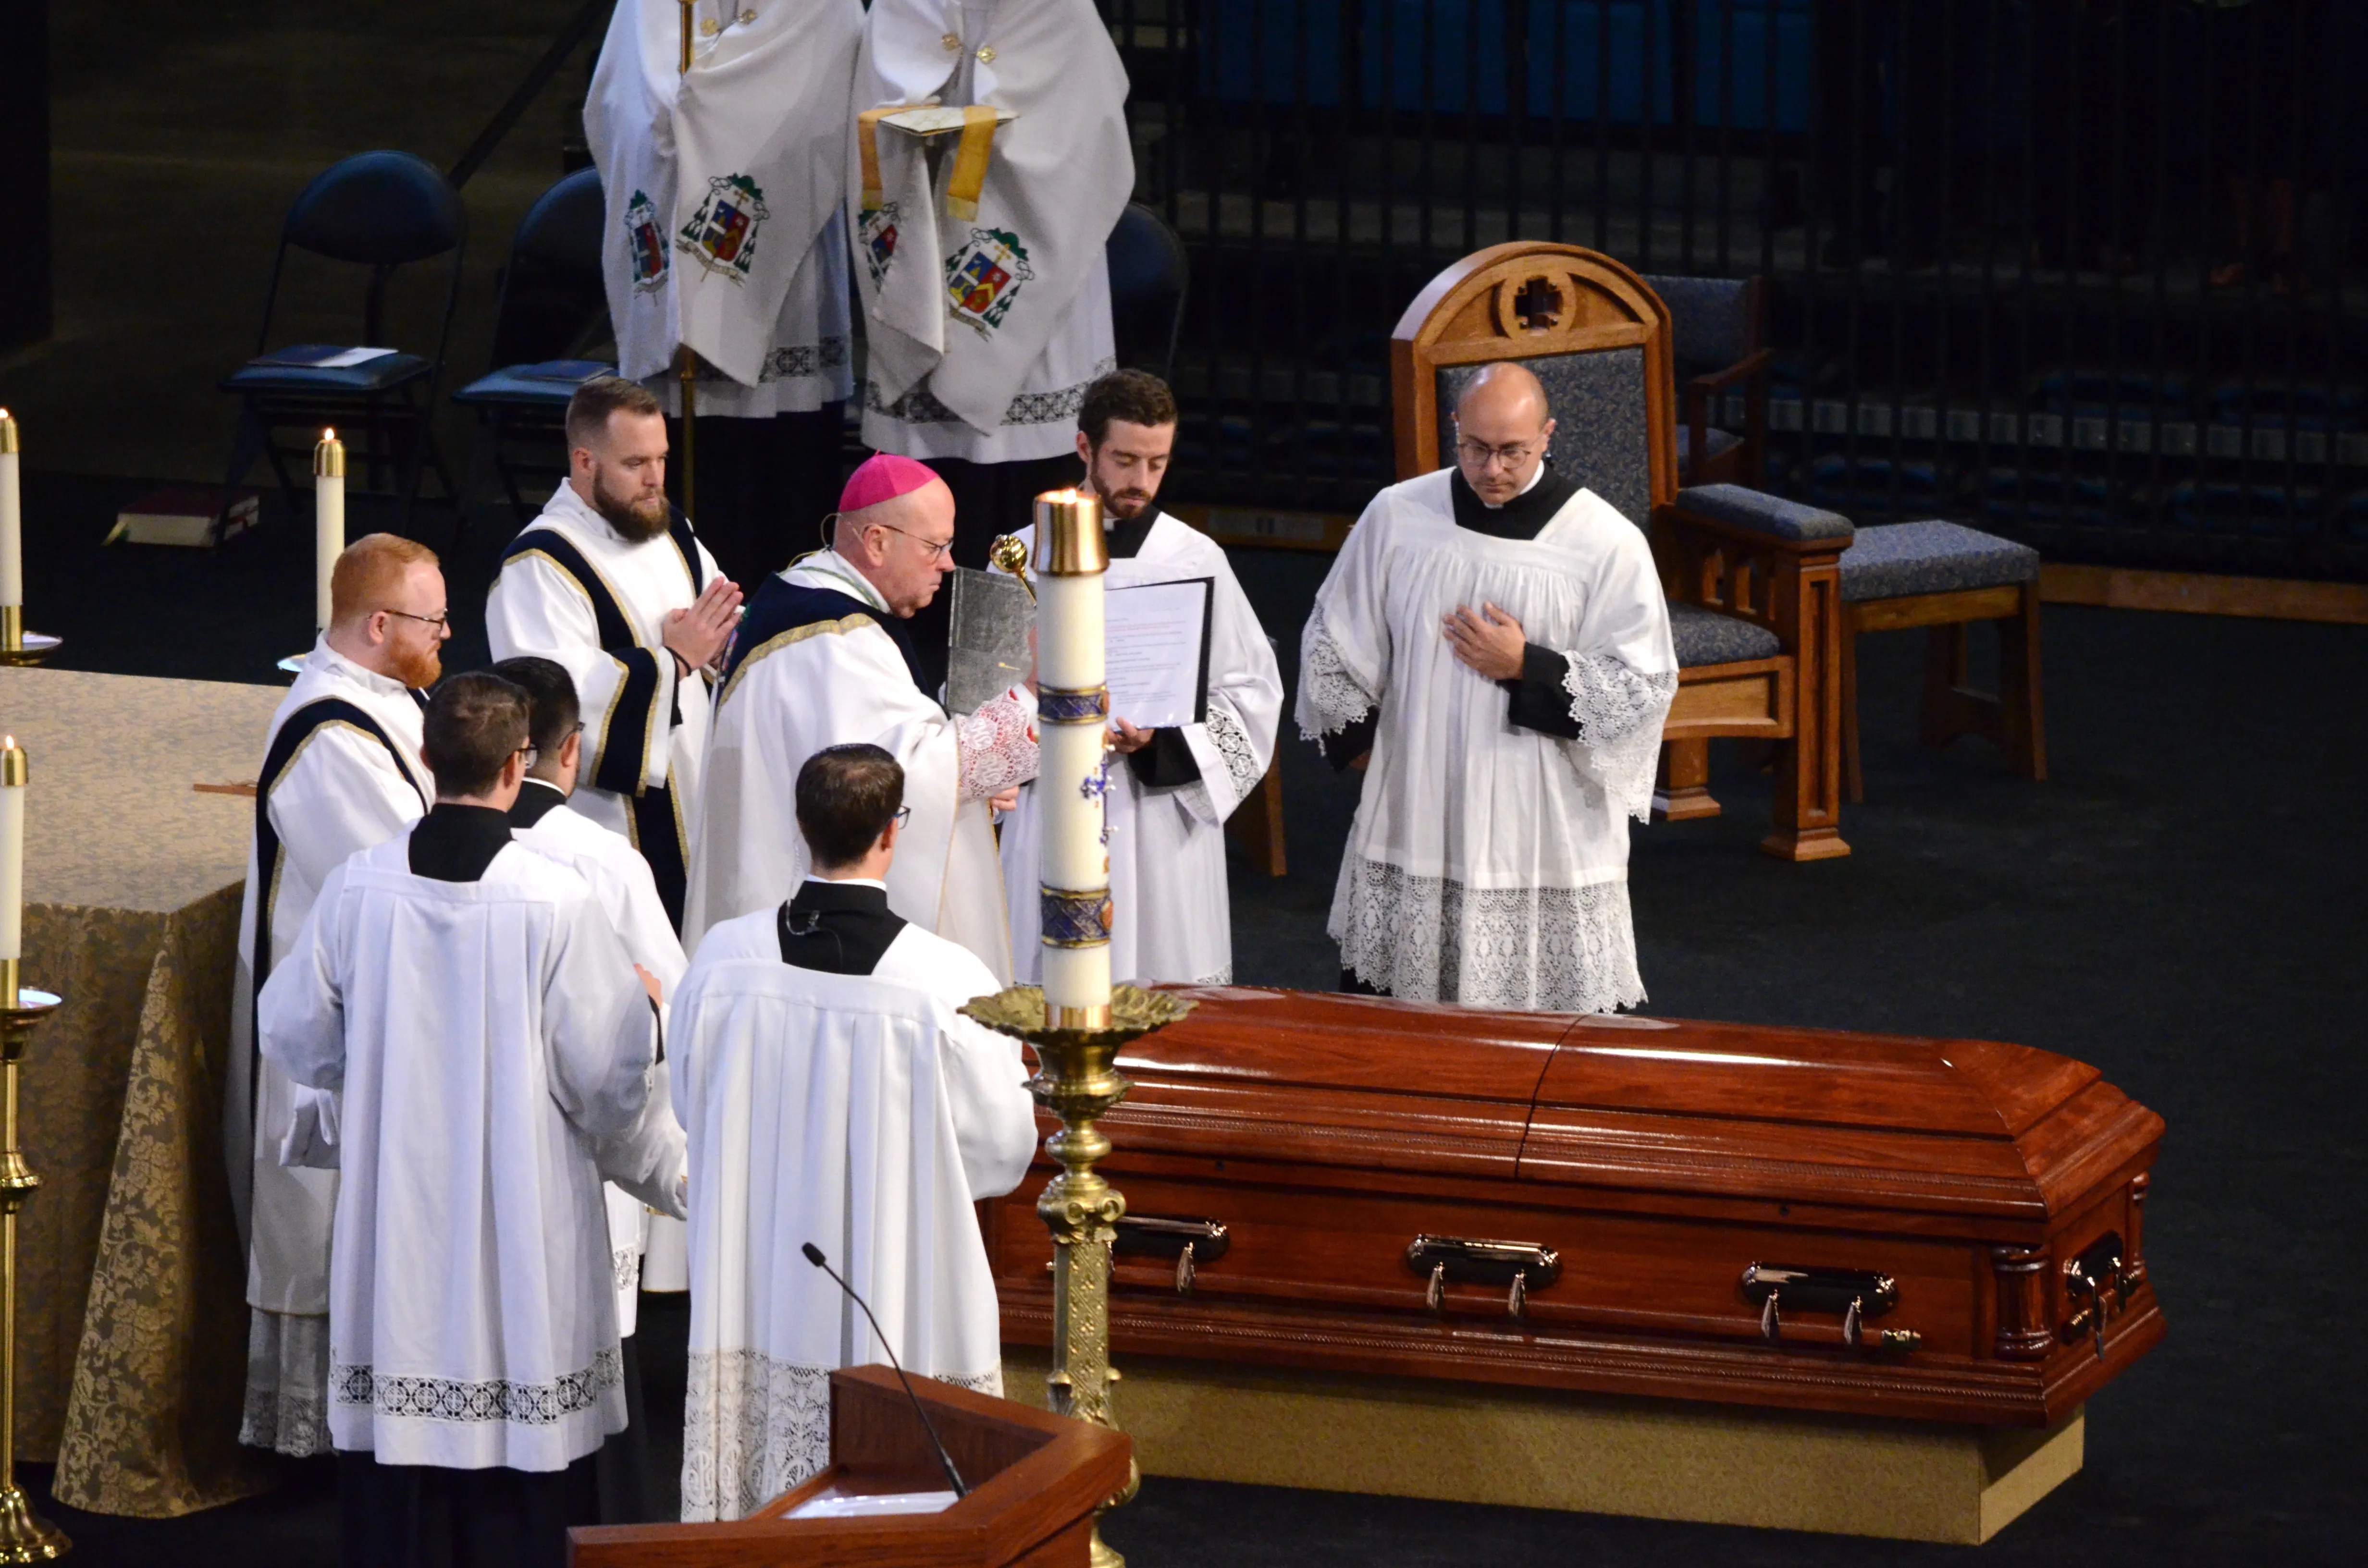 Bishop Carl Kemme of Wichita performs the absolution over the coffin of Fr. Emil Kapaun after his funeral Mass at Hartman Arena in Park City, Kan., Sept. 29, 2021.?w=200&h=150